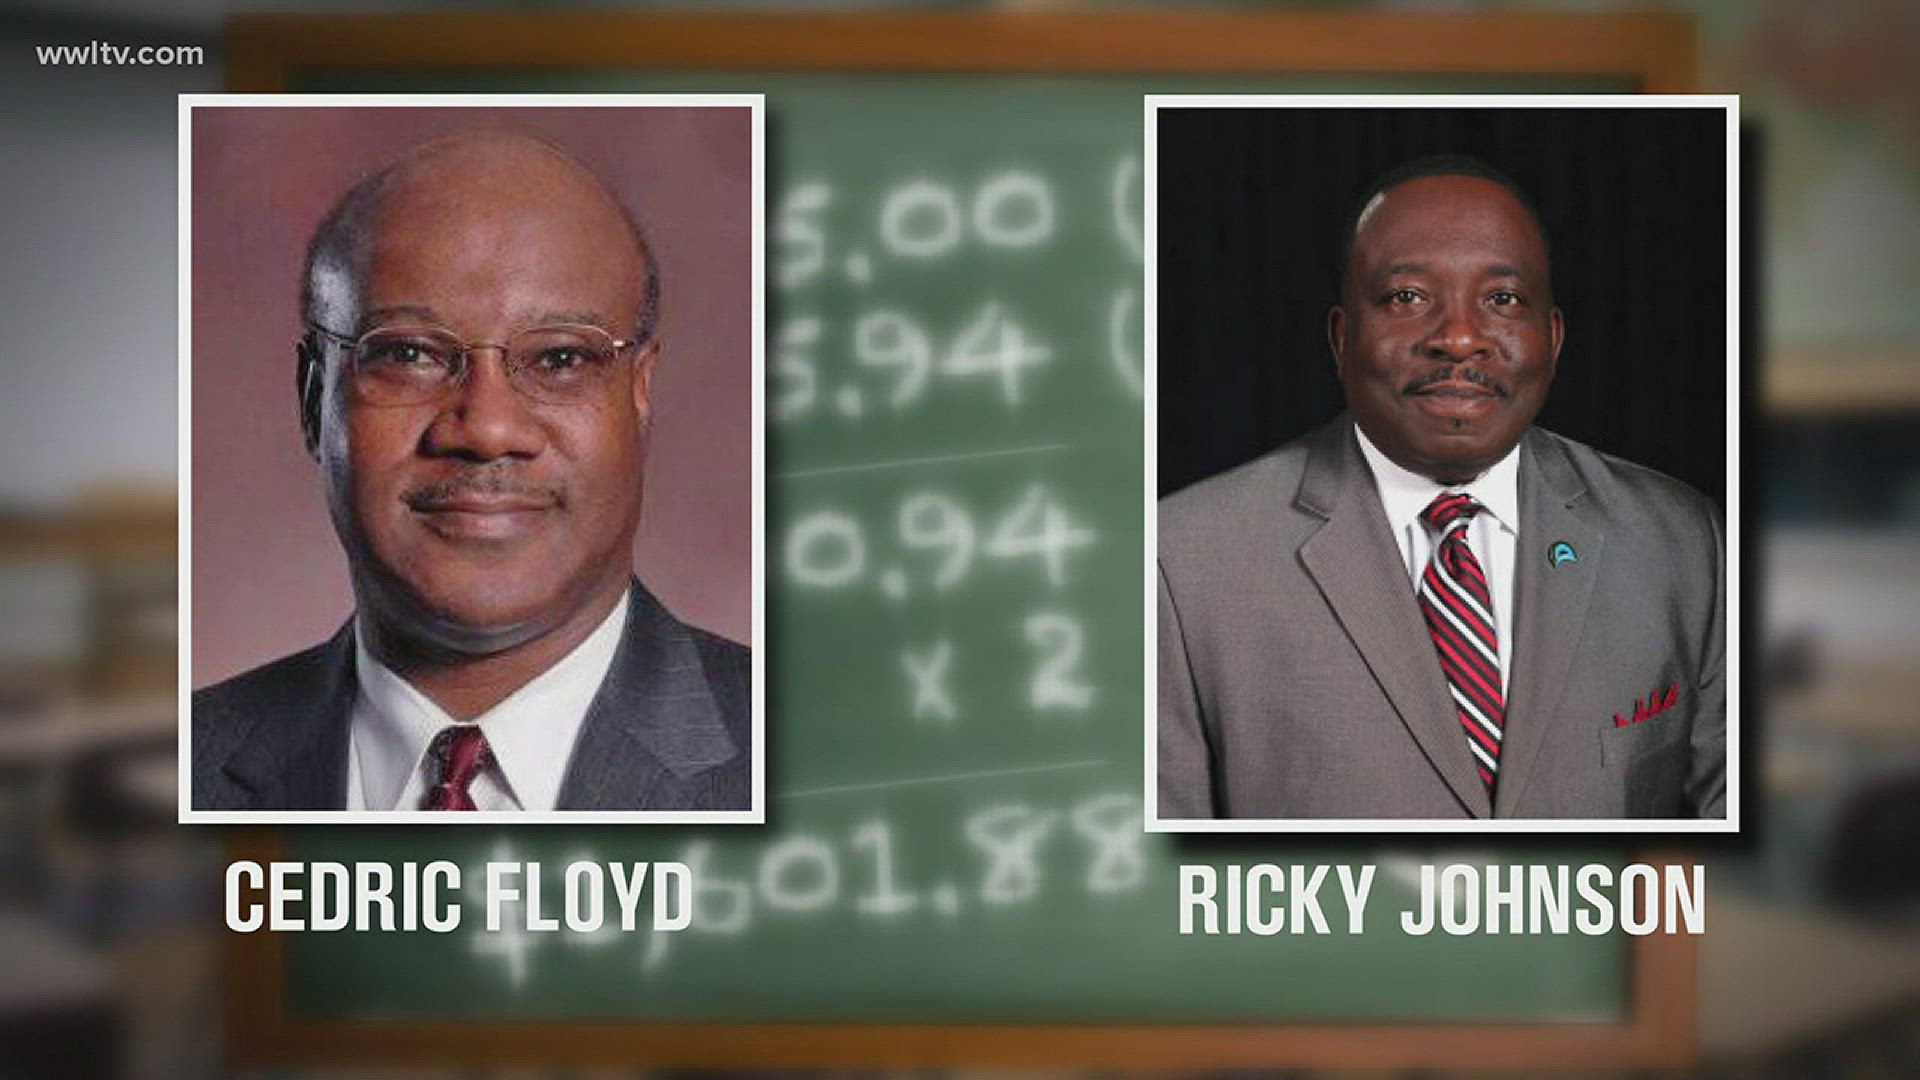 Two Jefferson Parish school board members spent an awful lot more than their counterparts.